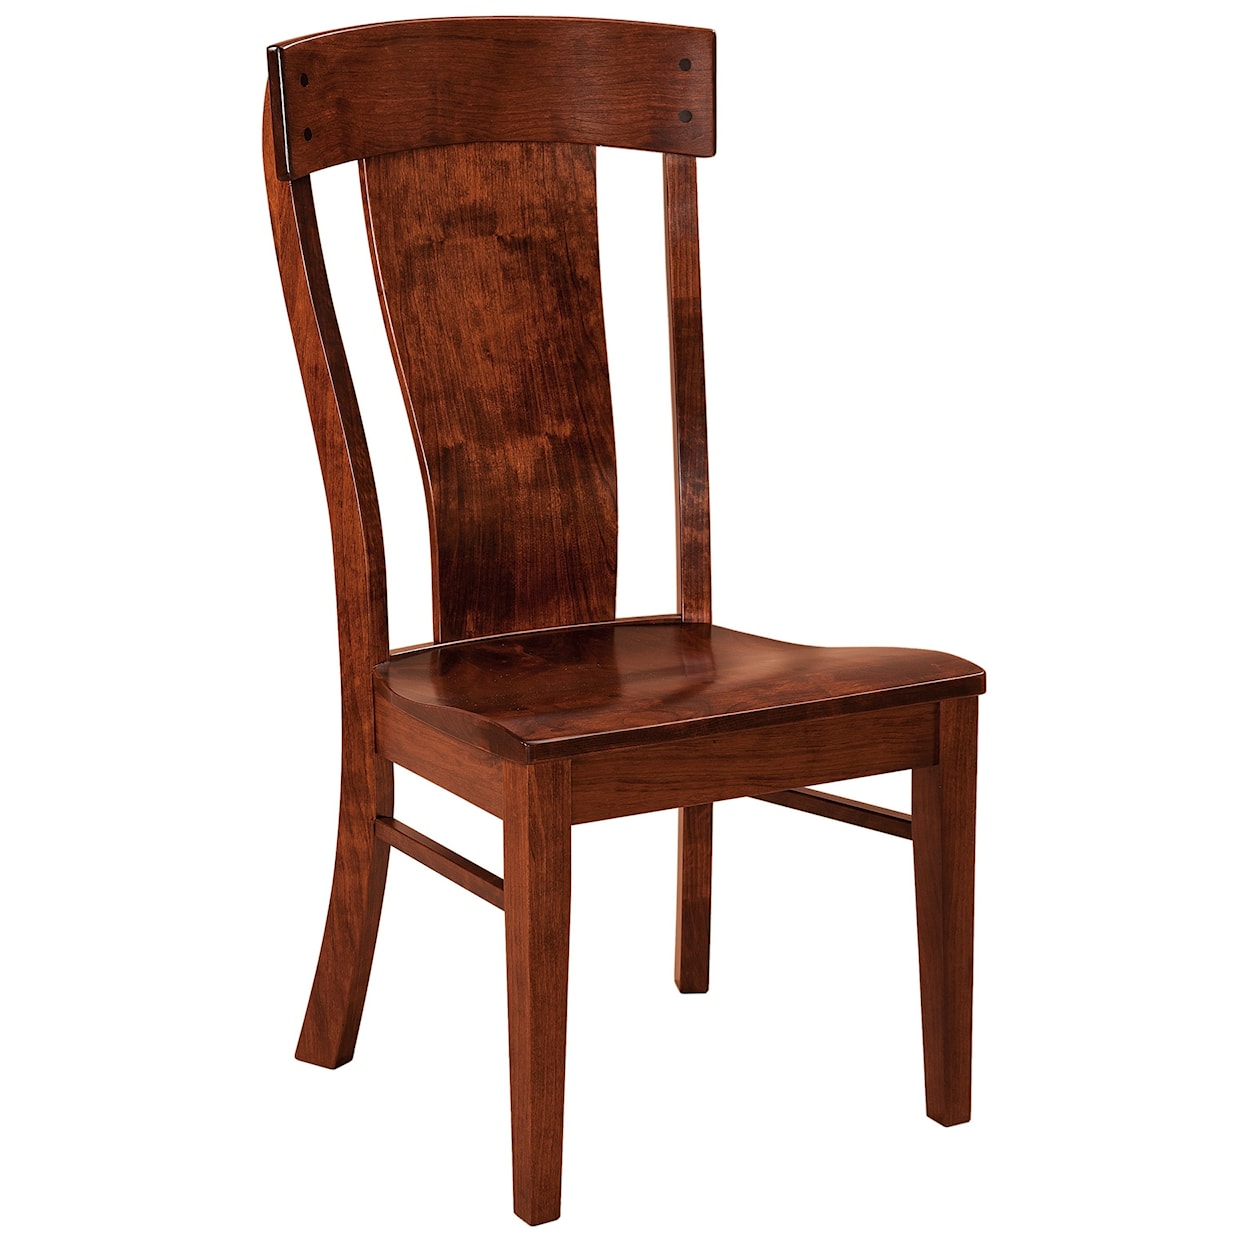 F&N Woodworking Lacombe Side Chair - Leather Seat